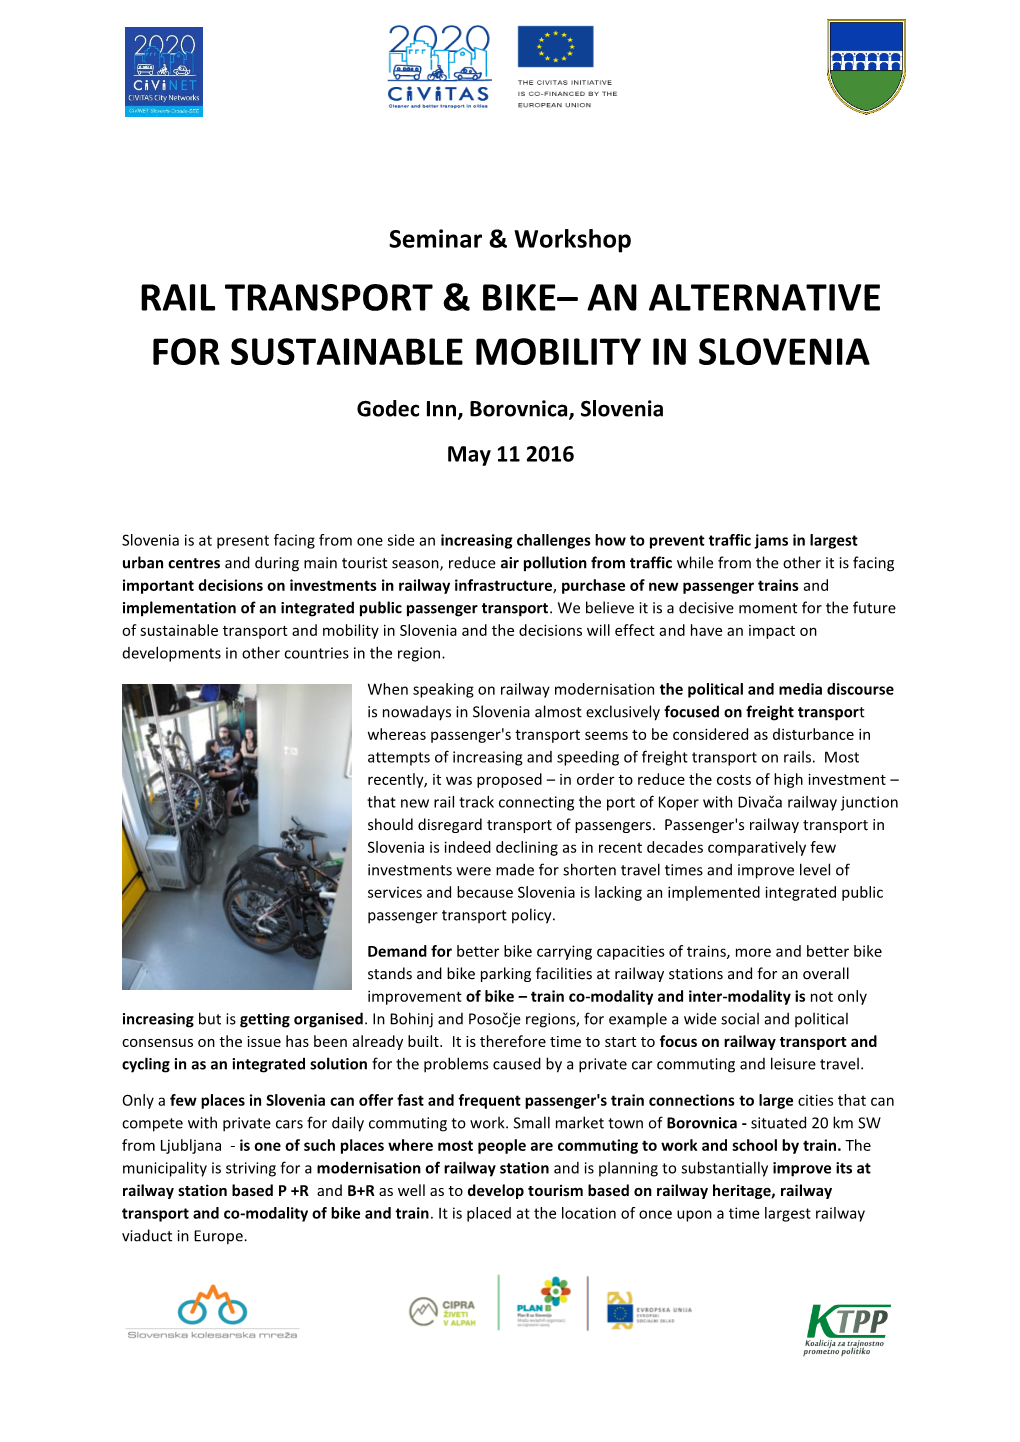 Rail Transport & Bike– an Alternative for Sustainable Mobility in Slovenia